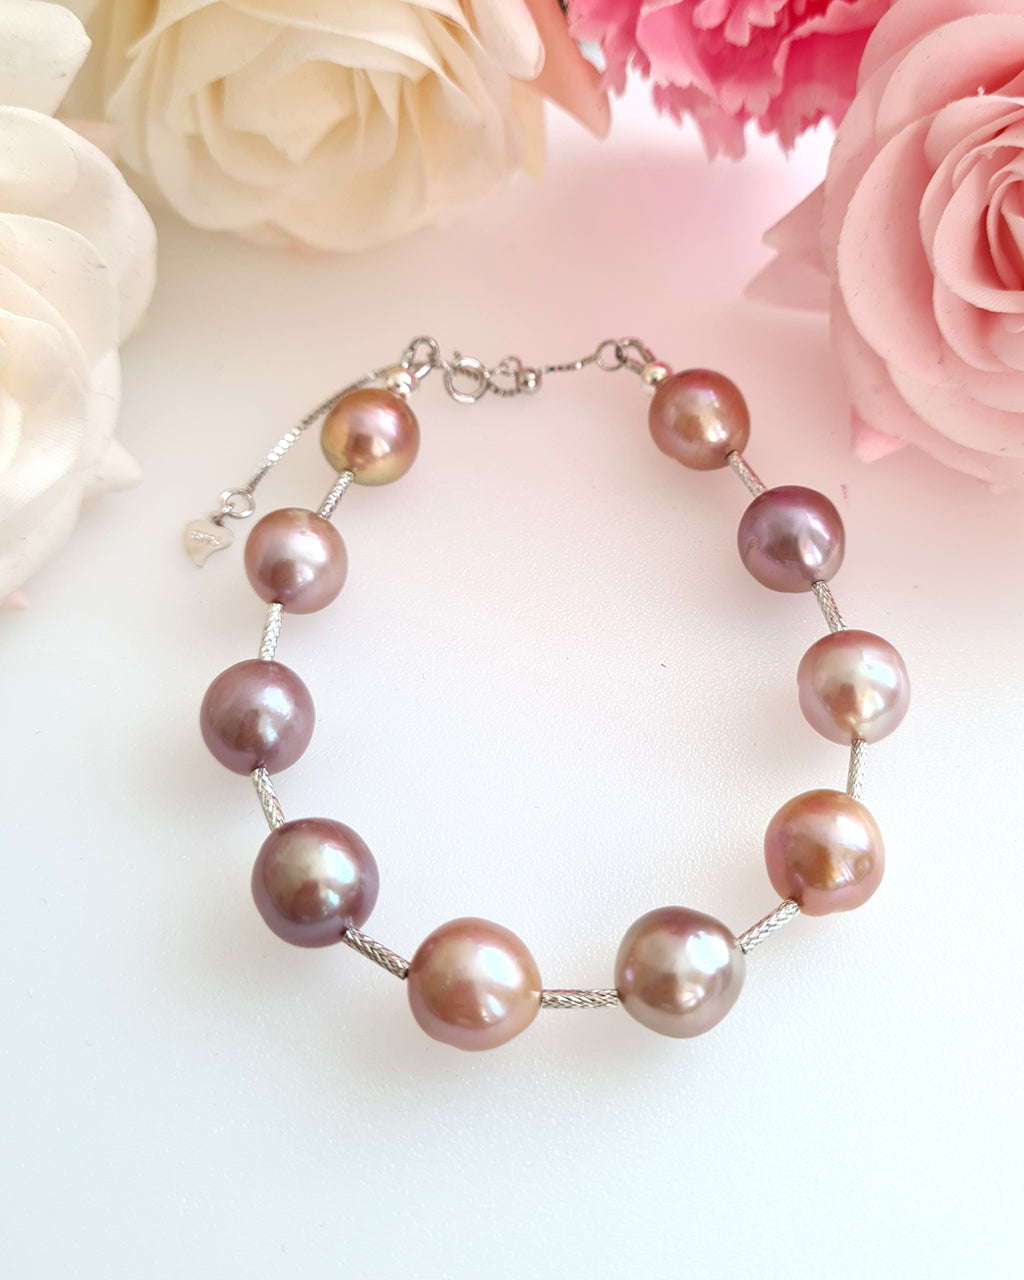 Edison Purple Pearl Bracelet | Sterling Silver Pearl Jewelry | Classy Elegant Gifts for her